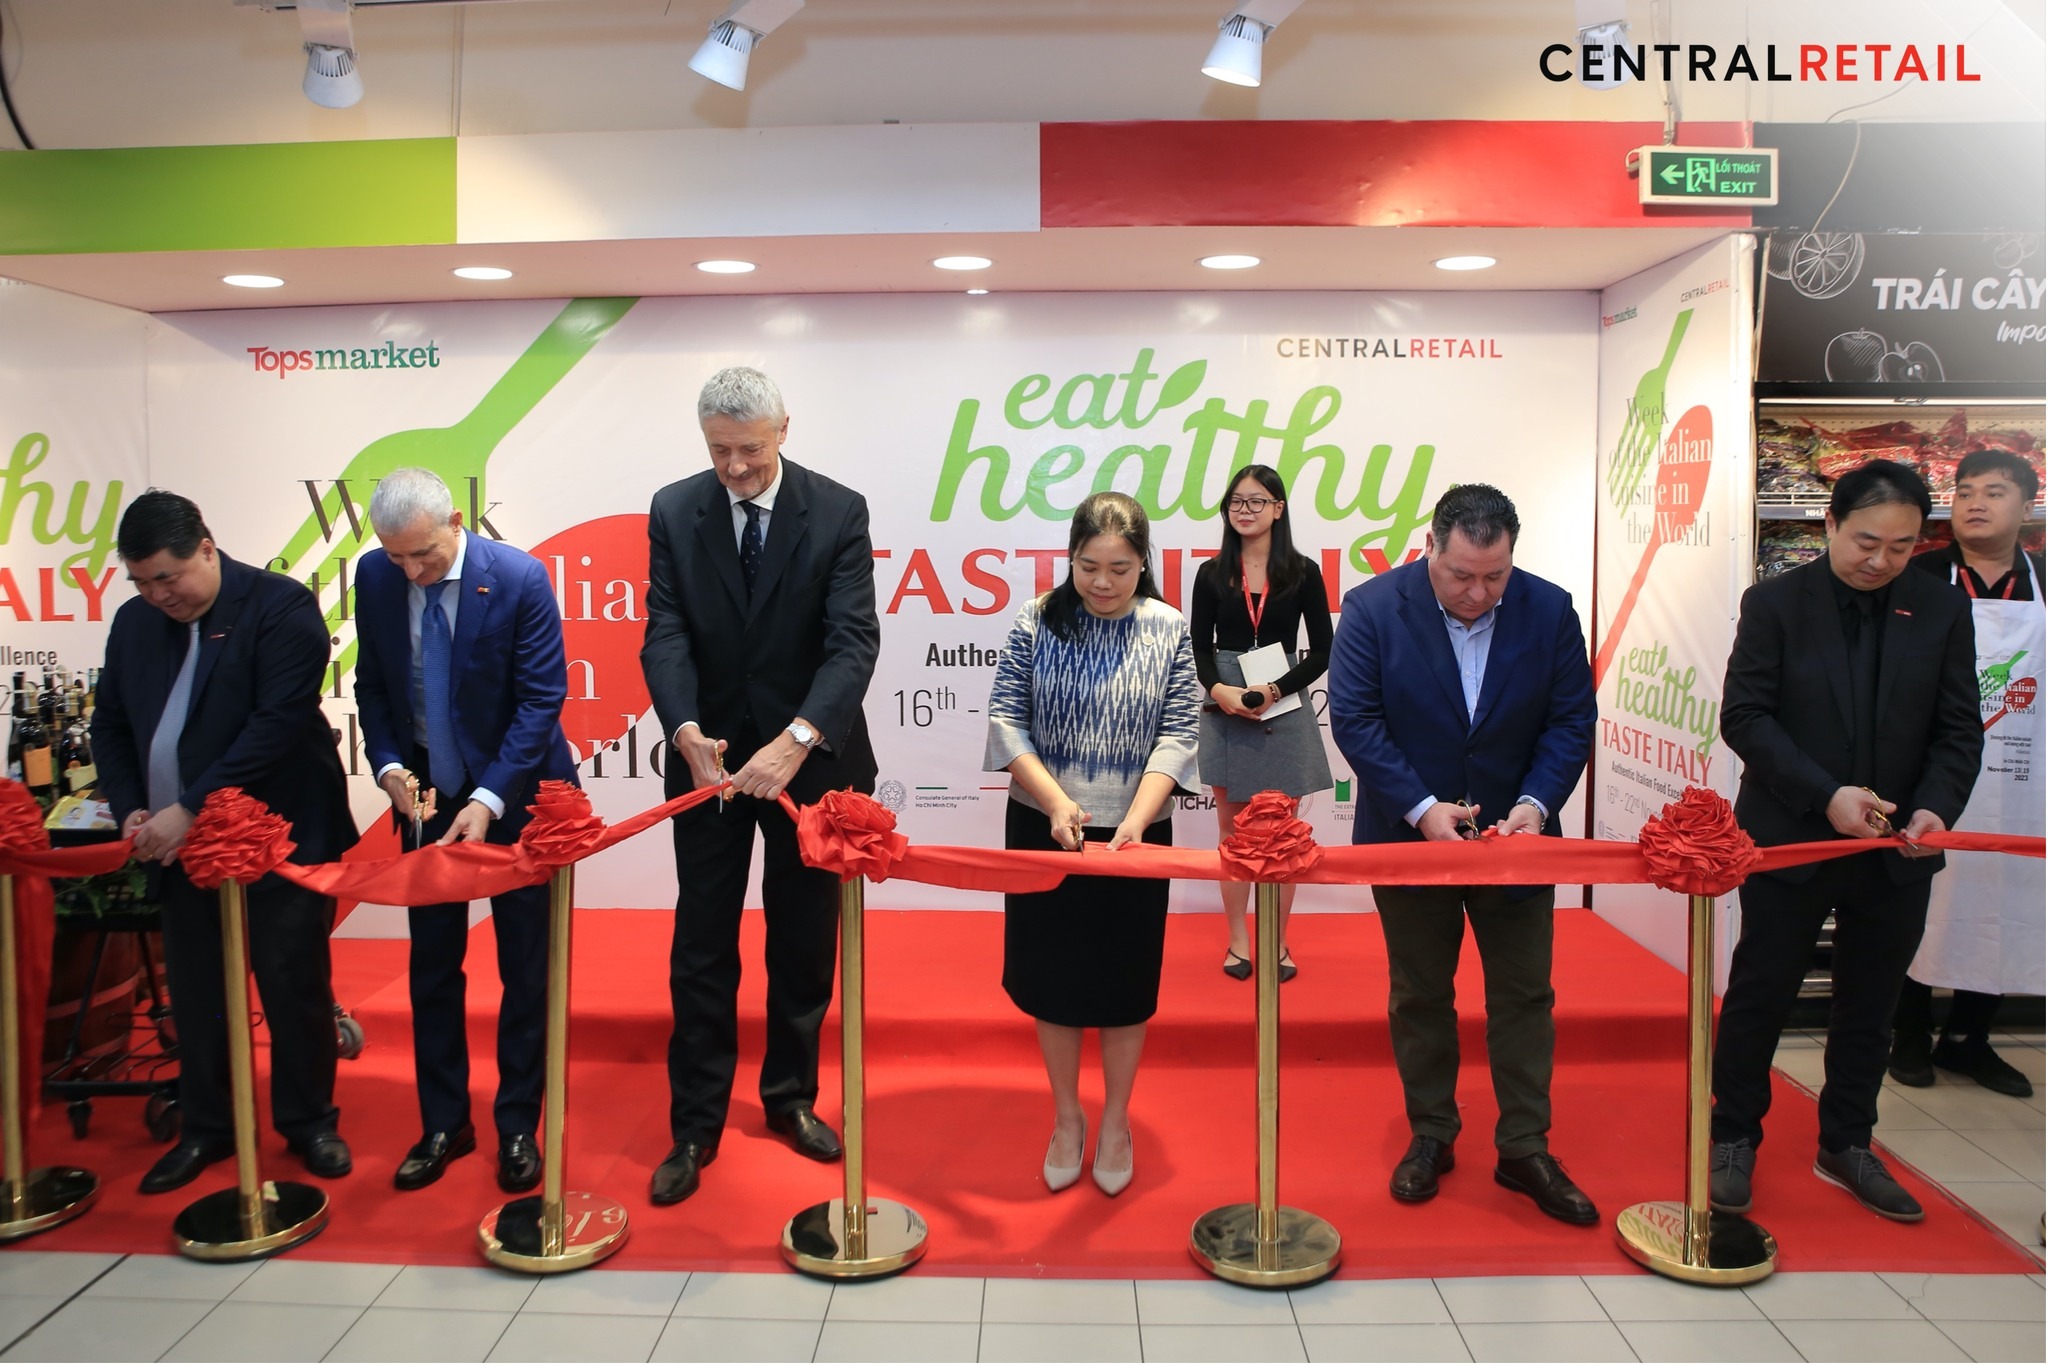 Central Retail in Vietnam organize Italian Food Fair across 17 GO! Hypermarkets and Tops markets nationwide